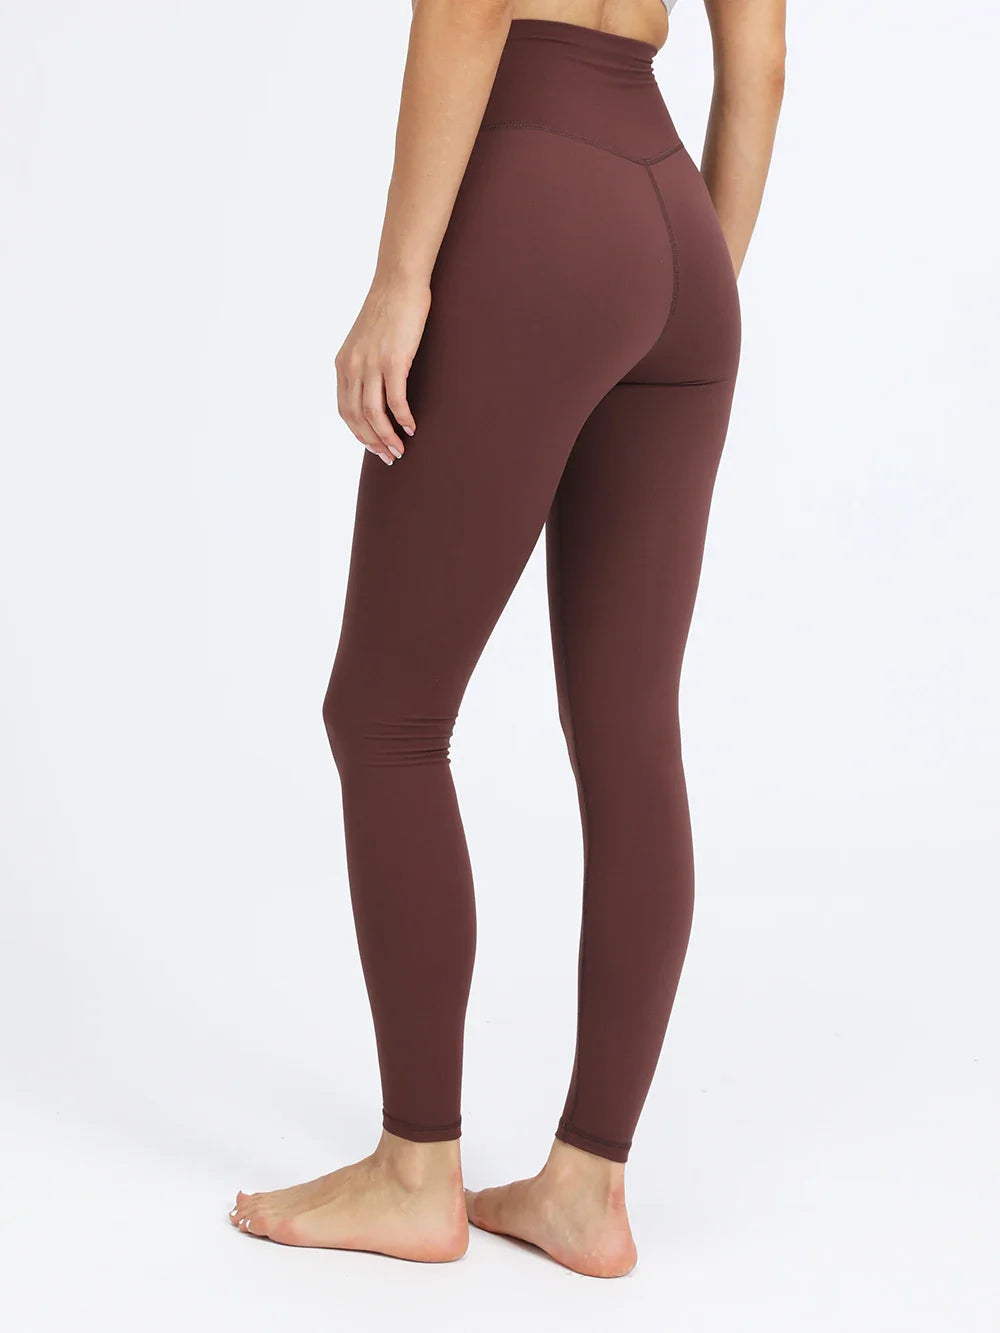 Canmol 28" Seamless Yoga Leggings for Women: Buttery Soft Gym Tights Pantalones